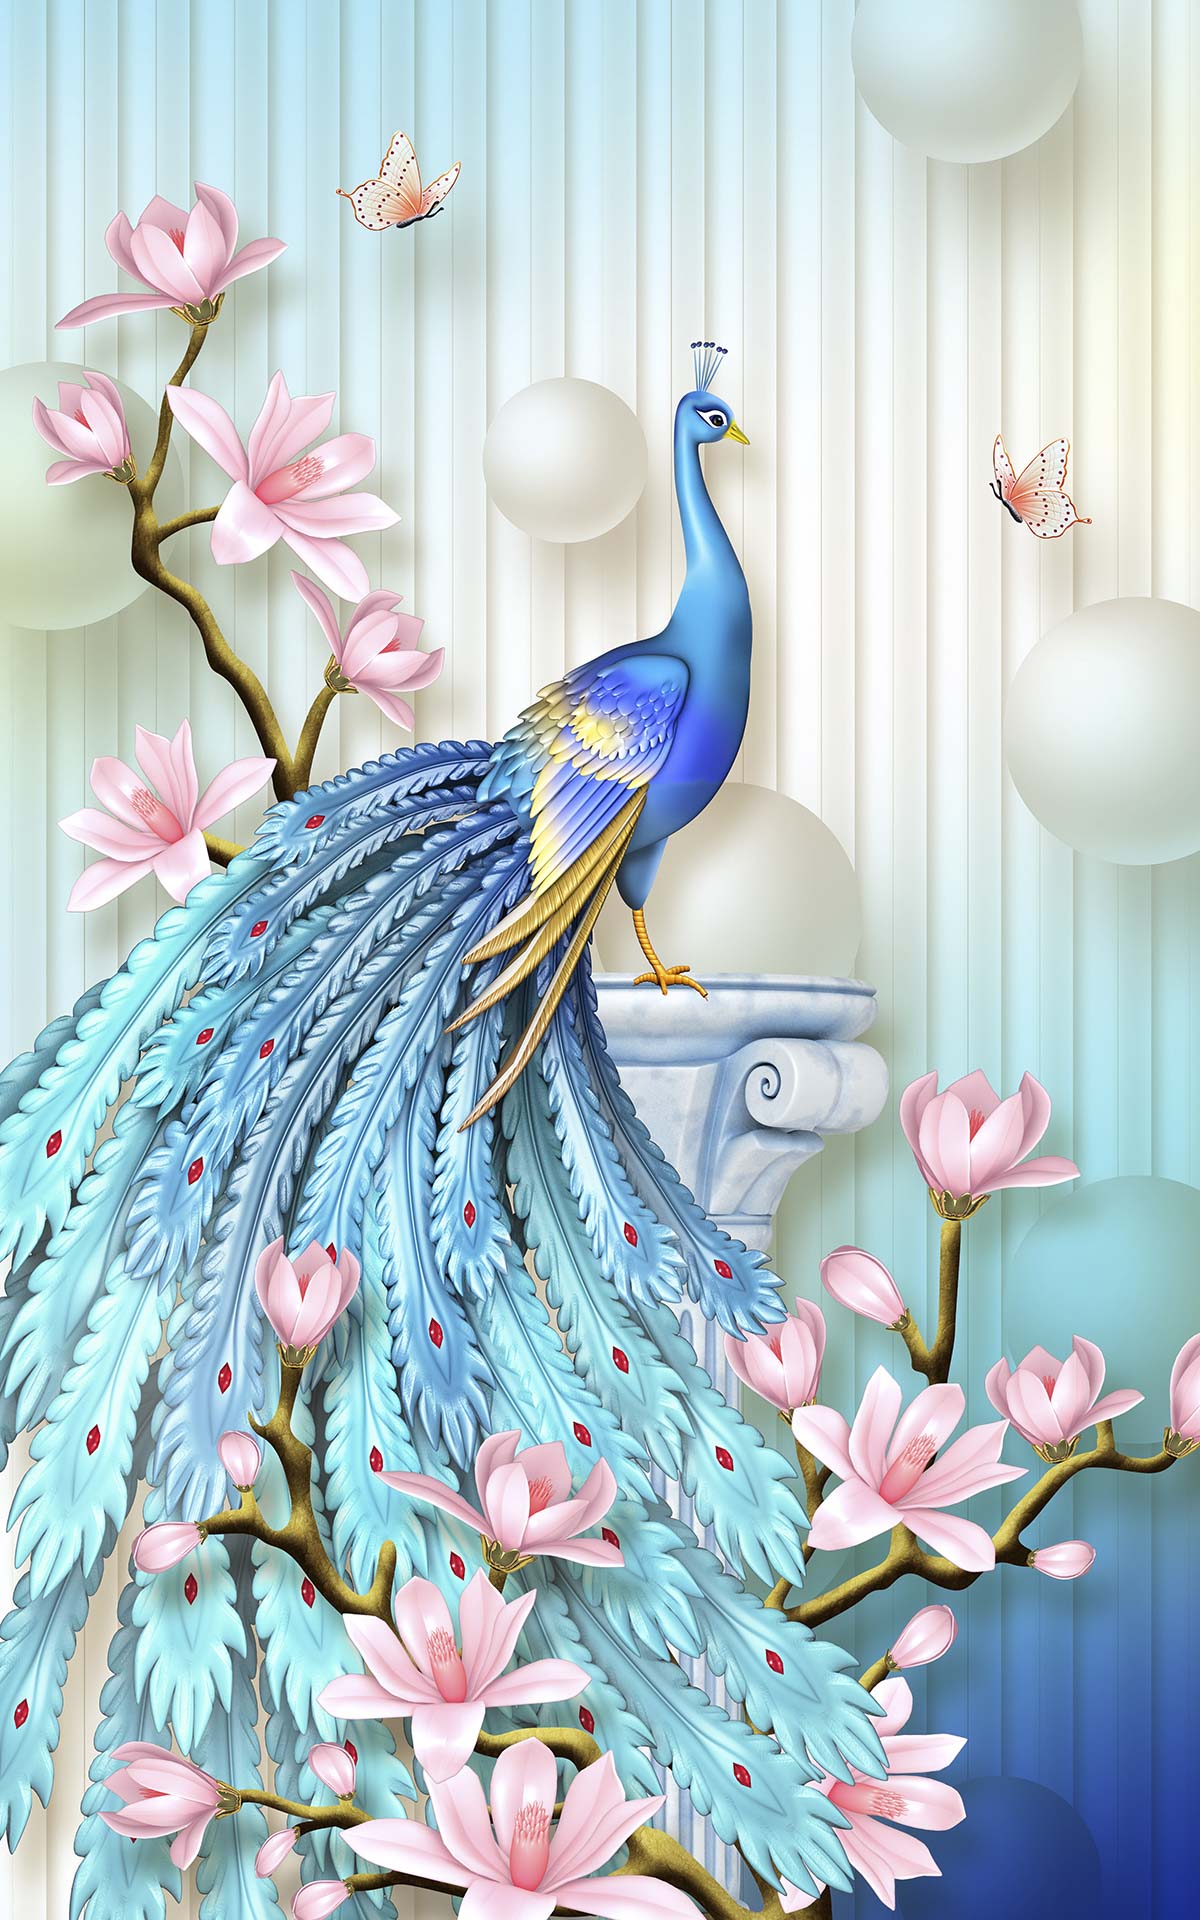 A blue peacock with pink flowers and white balls